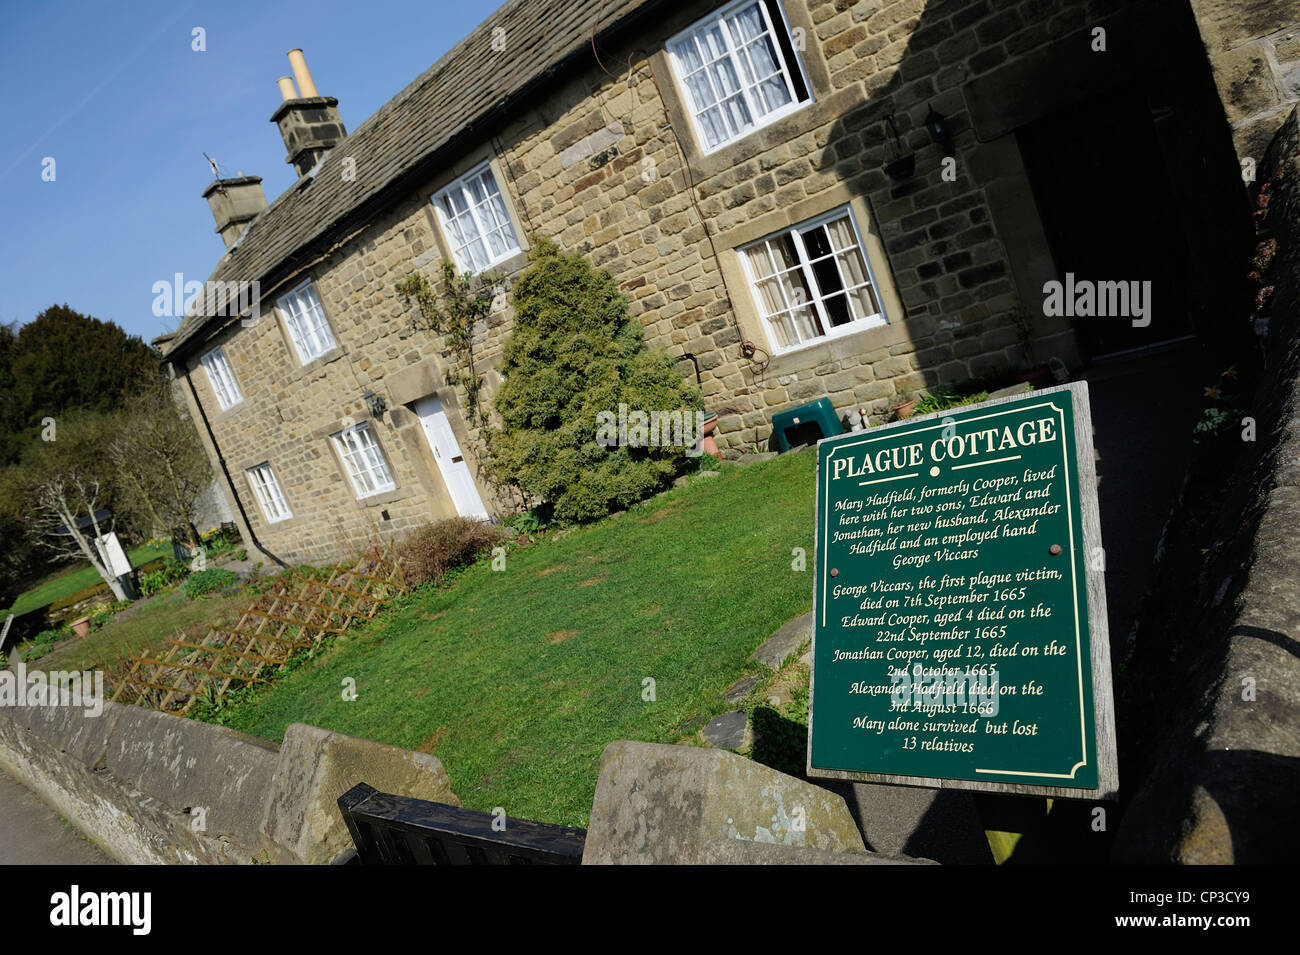 plague cottage Eyam Derbyshire home of mary hadfield formely cooper. england uk Stock Photo